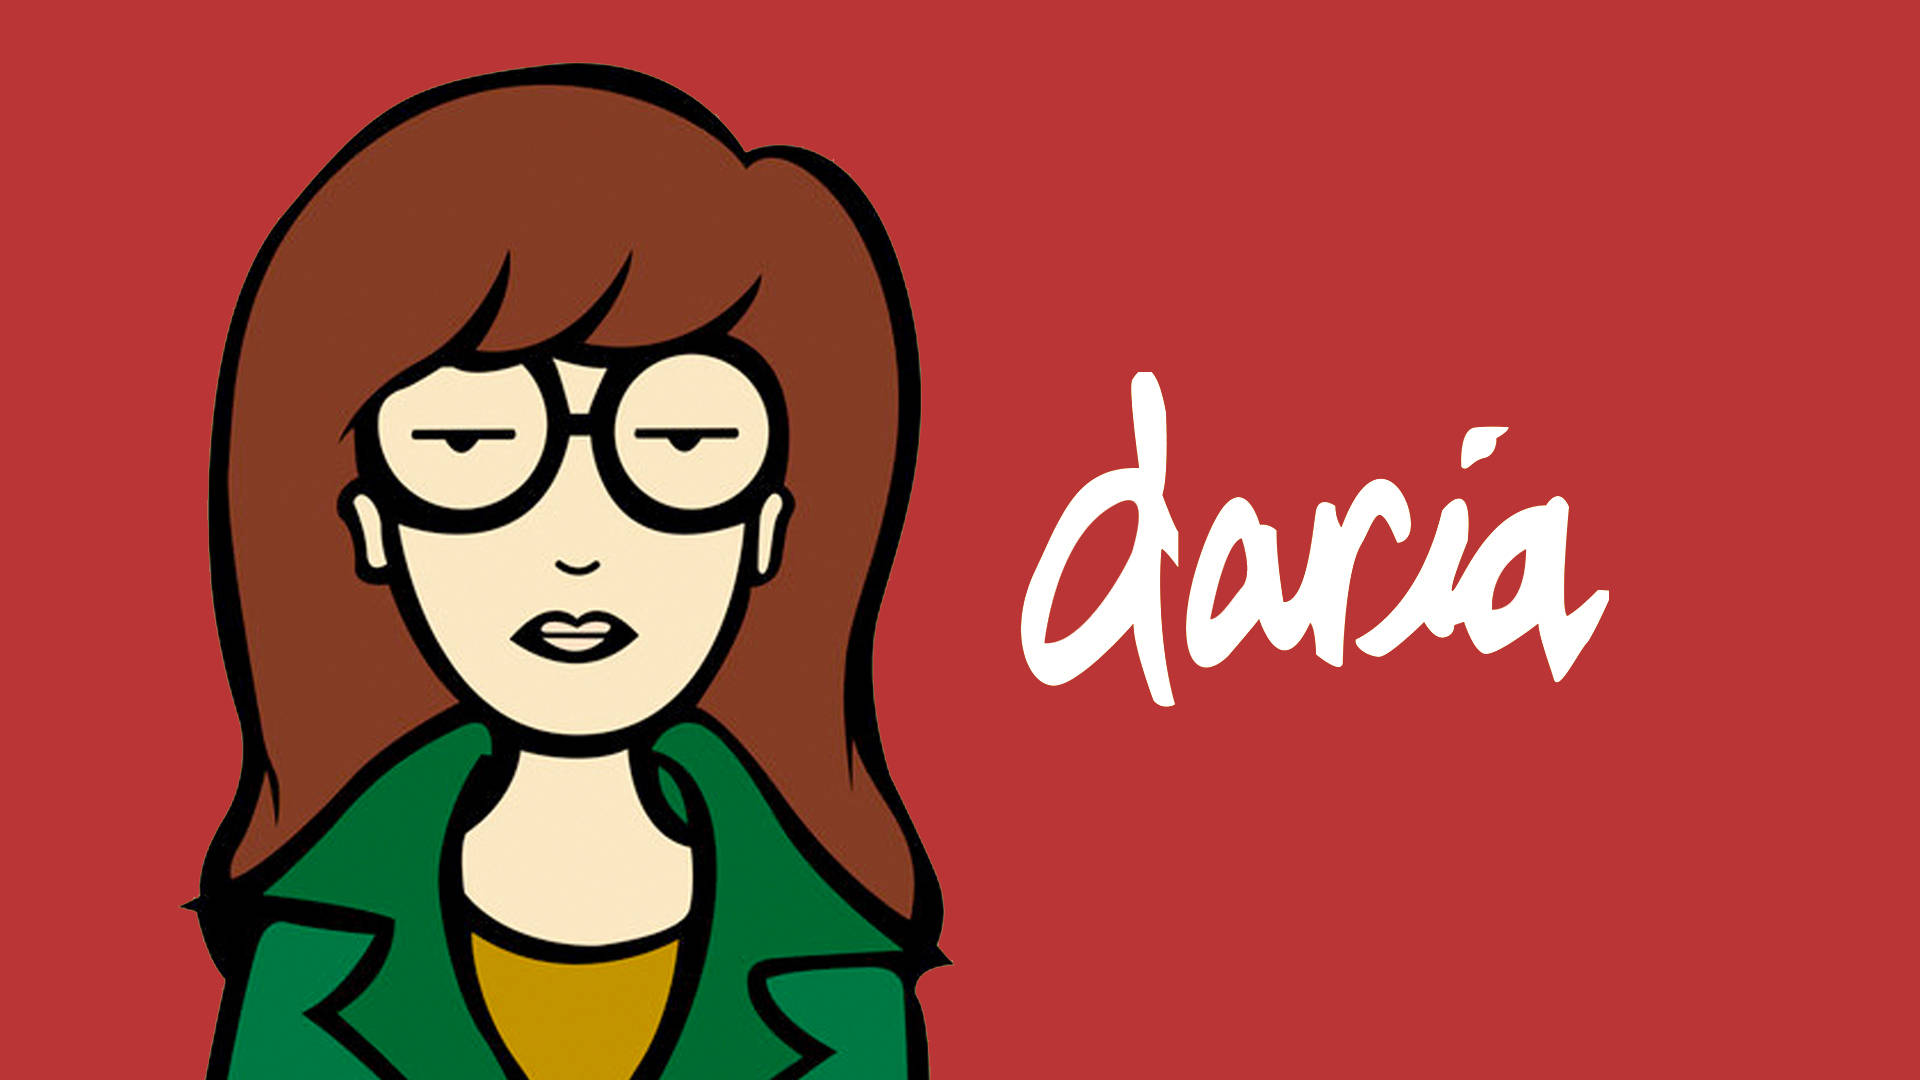 Daria Red Poster Background